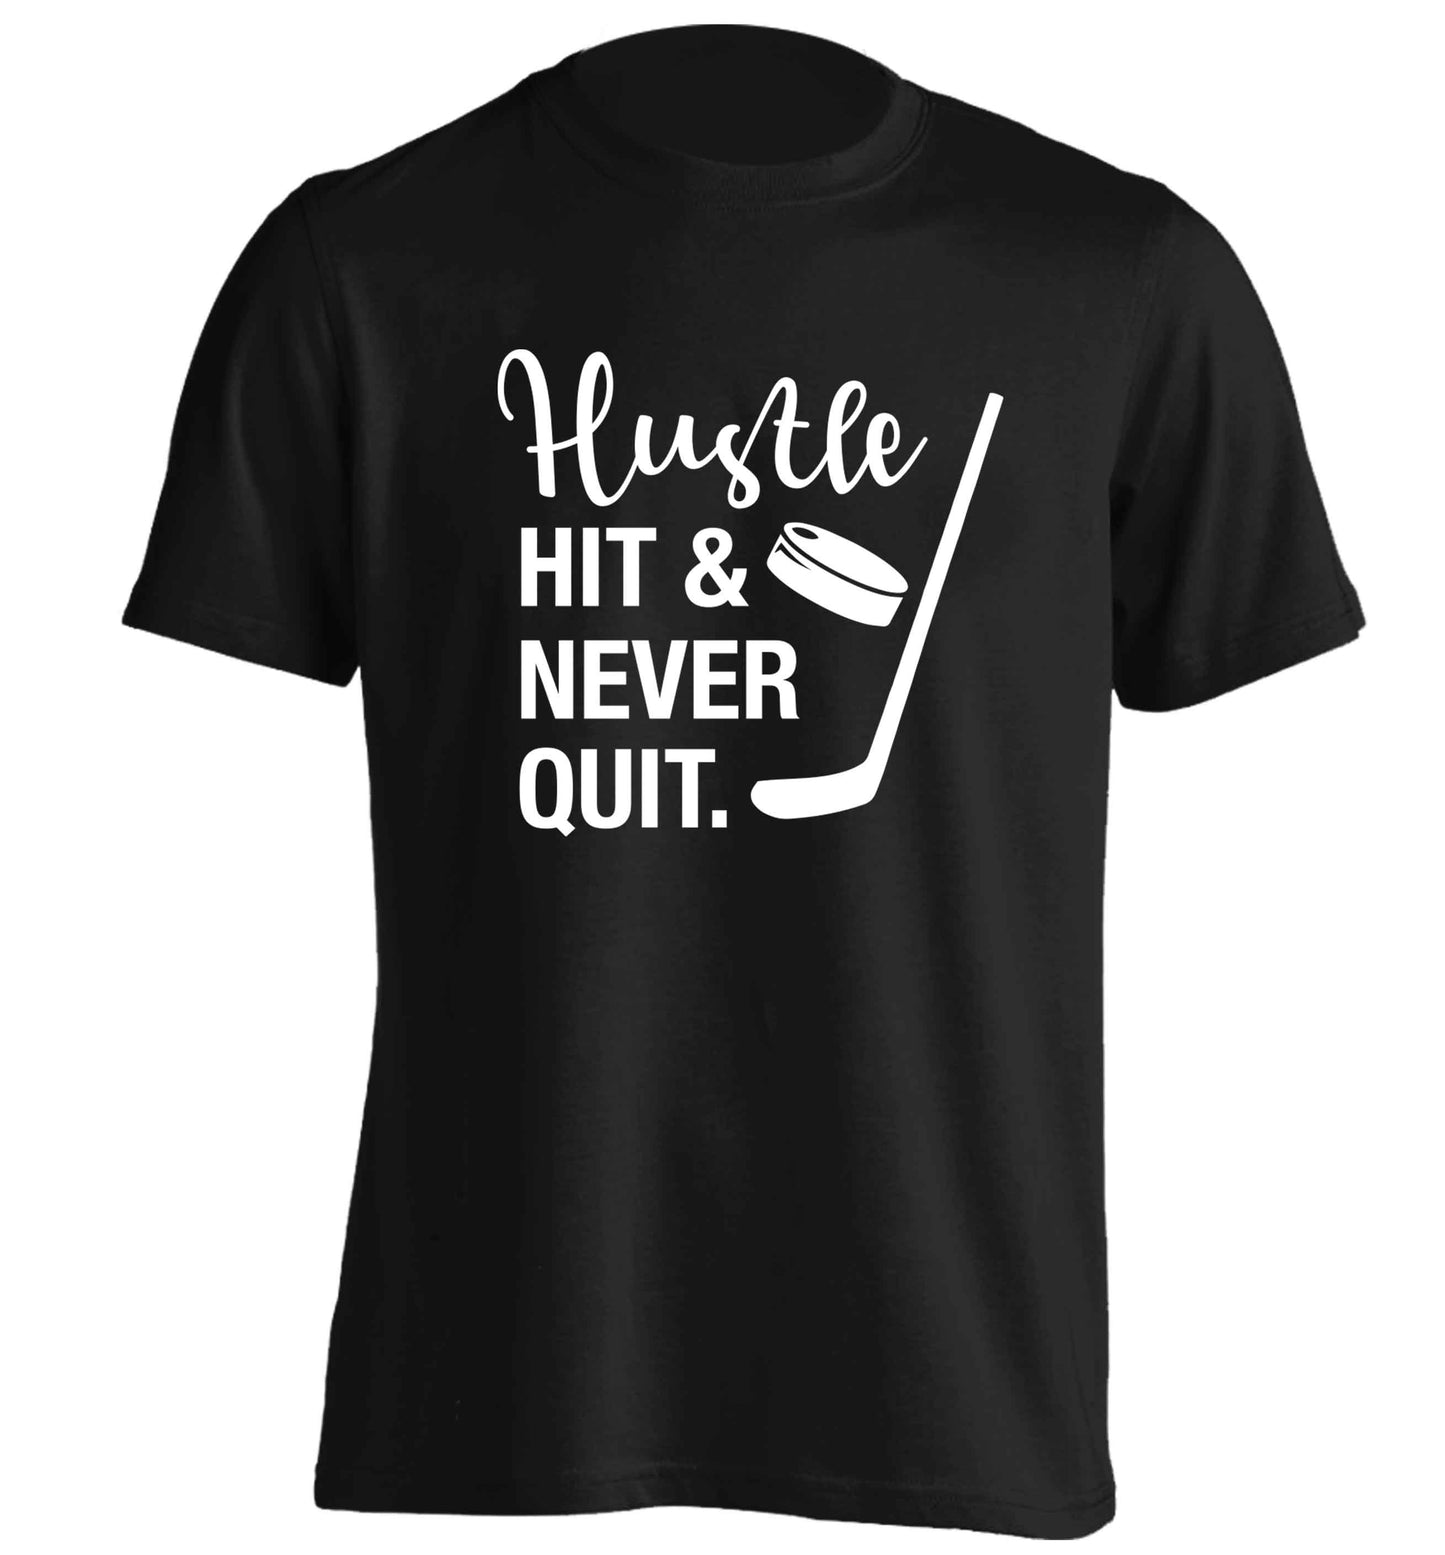 Hustle hit and never quit adults unisex black Tshirt 2XL